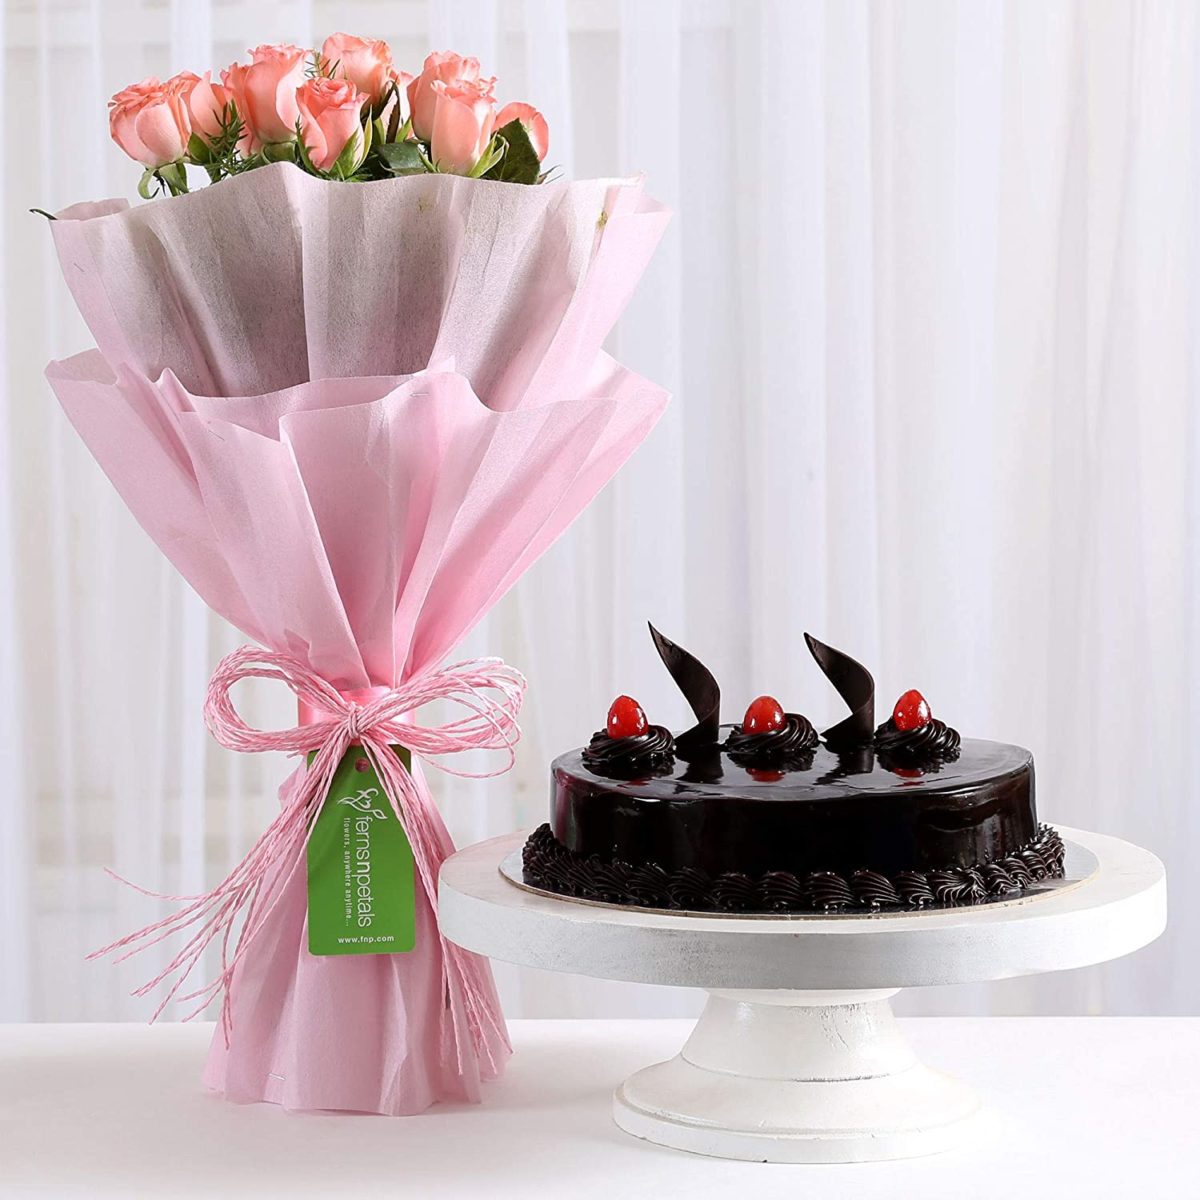 Flowers and Cake are Never Out of Date